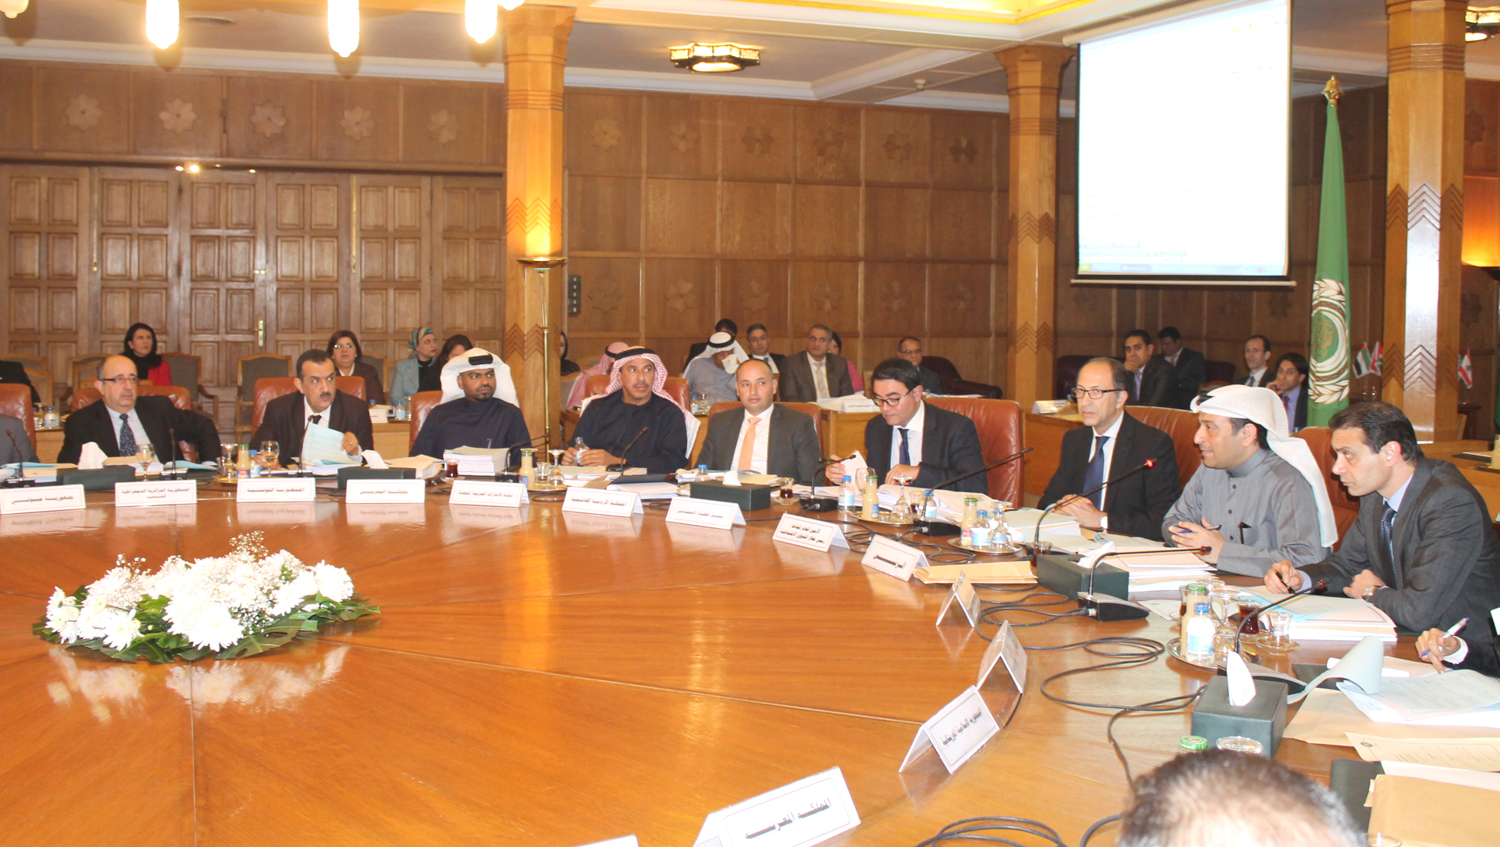 Social Affairs Committee of the Arab League Economic and Social Council during meeting